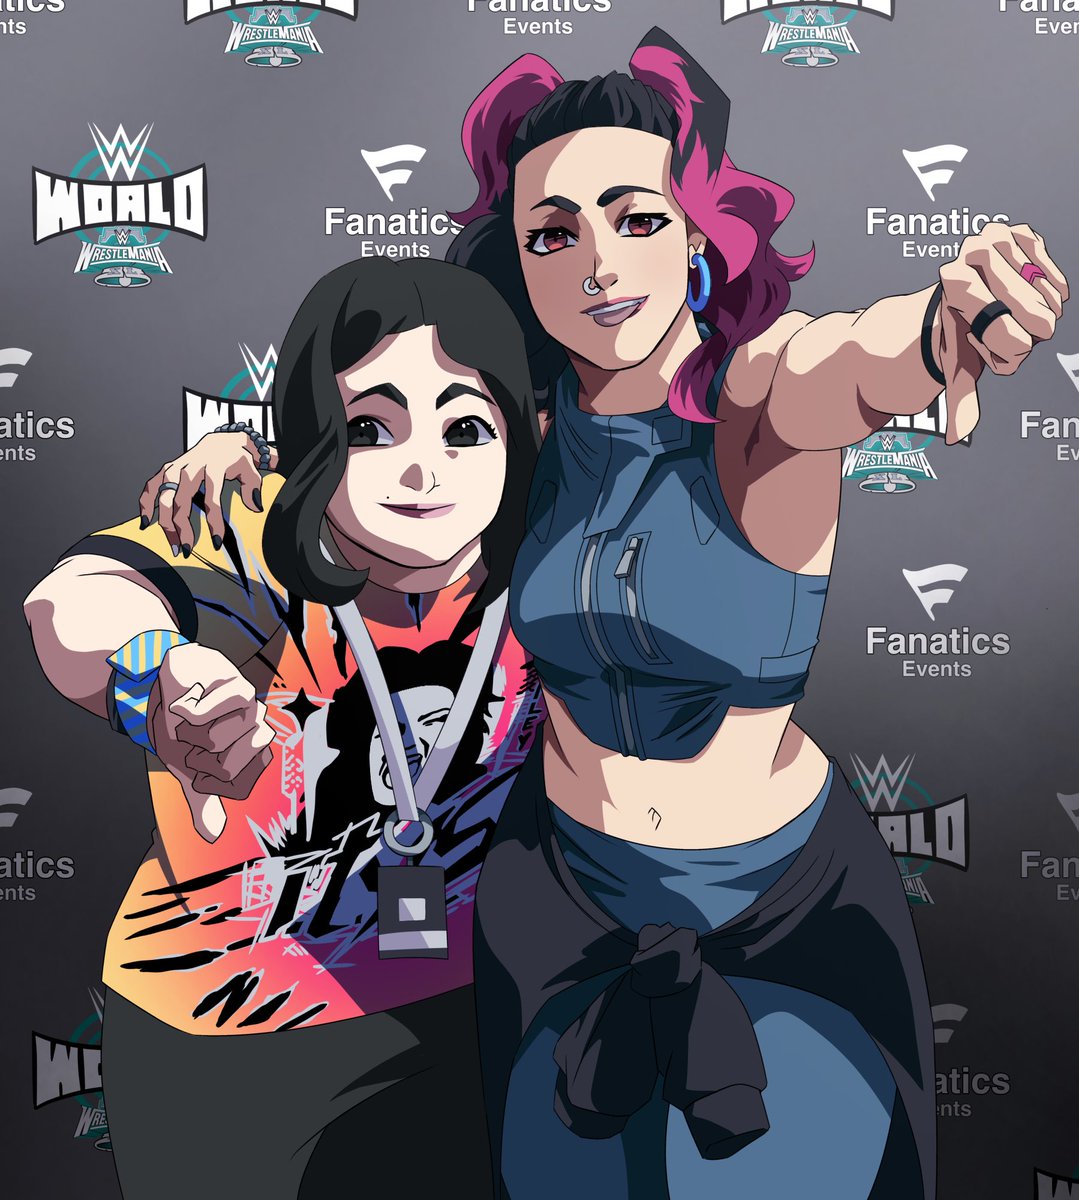 @itsBayleyWWE & I, the @NorbertoGaetan edition! Thanks so much for your art, I love your work & find your style is so cool! Wanted to commemorate a cool moment 😊